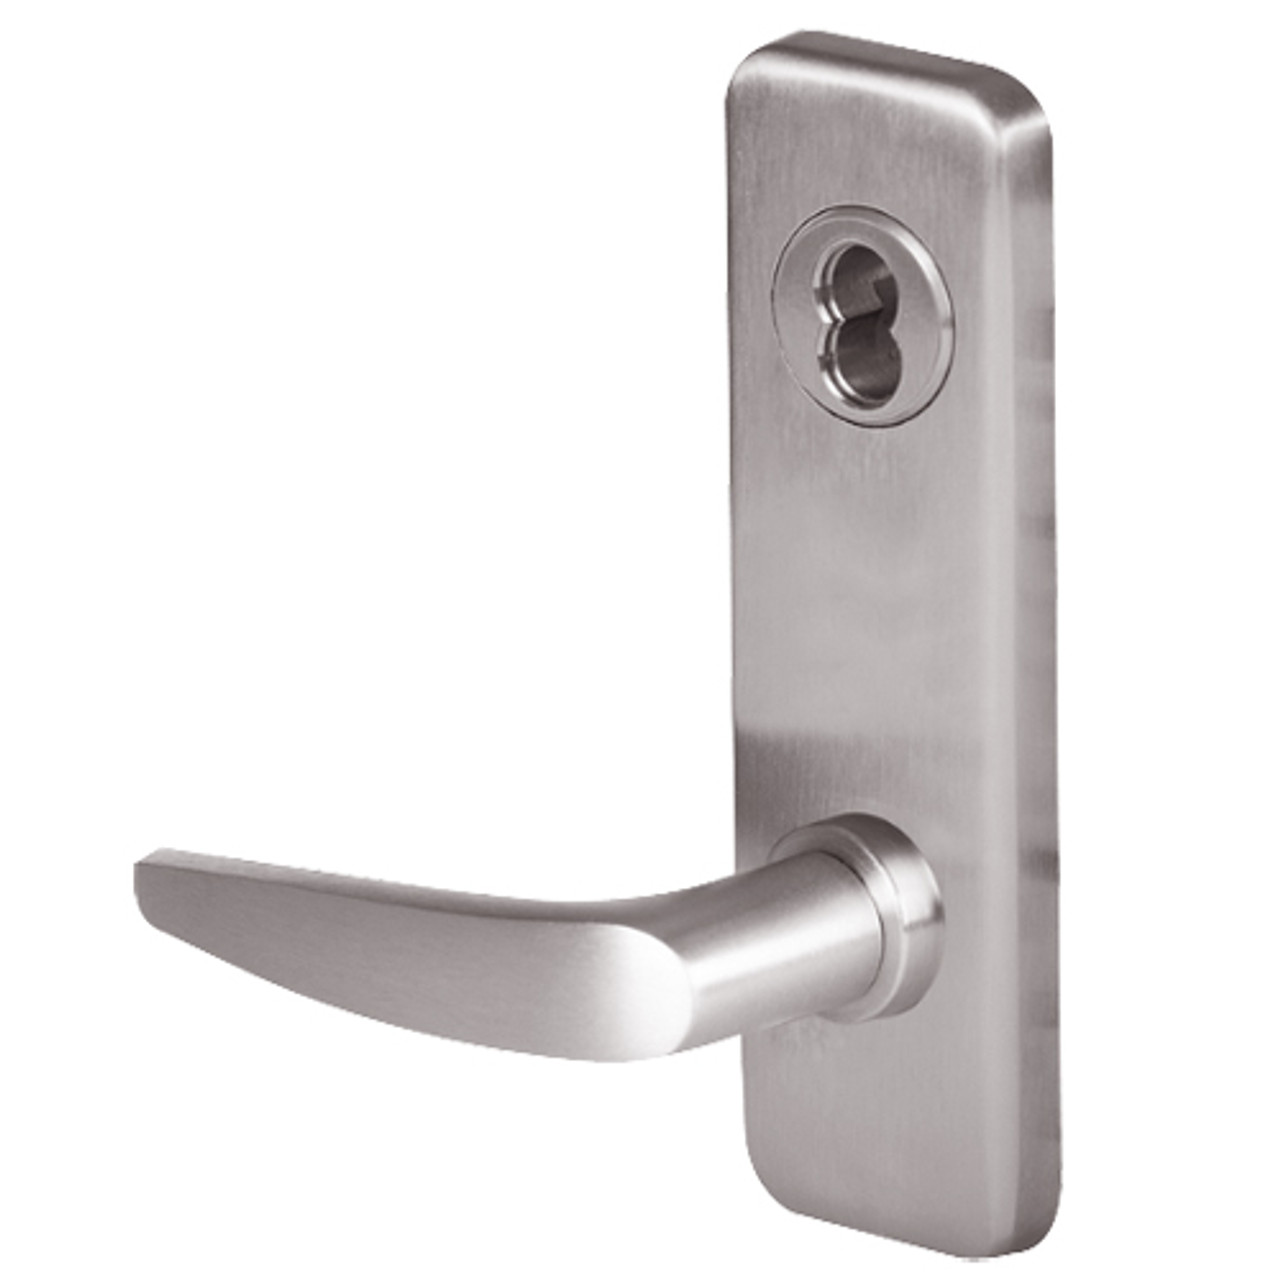 45HW7TWEL16J63012V Best 40HW series Double Key Deadbolt Fail Safe Electromechanical Mortise Lever Lock with Curved w/ No Return Style in Satin Stainless Steel